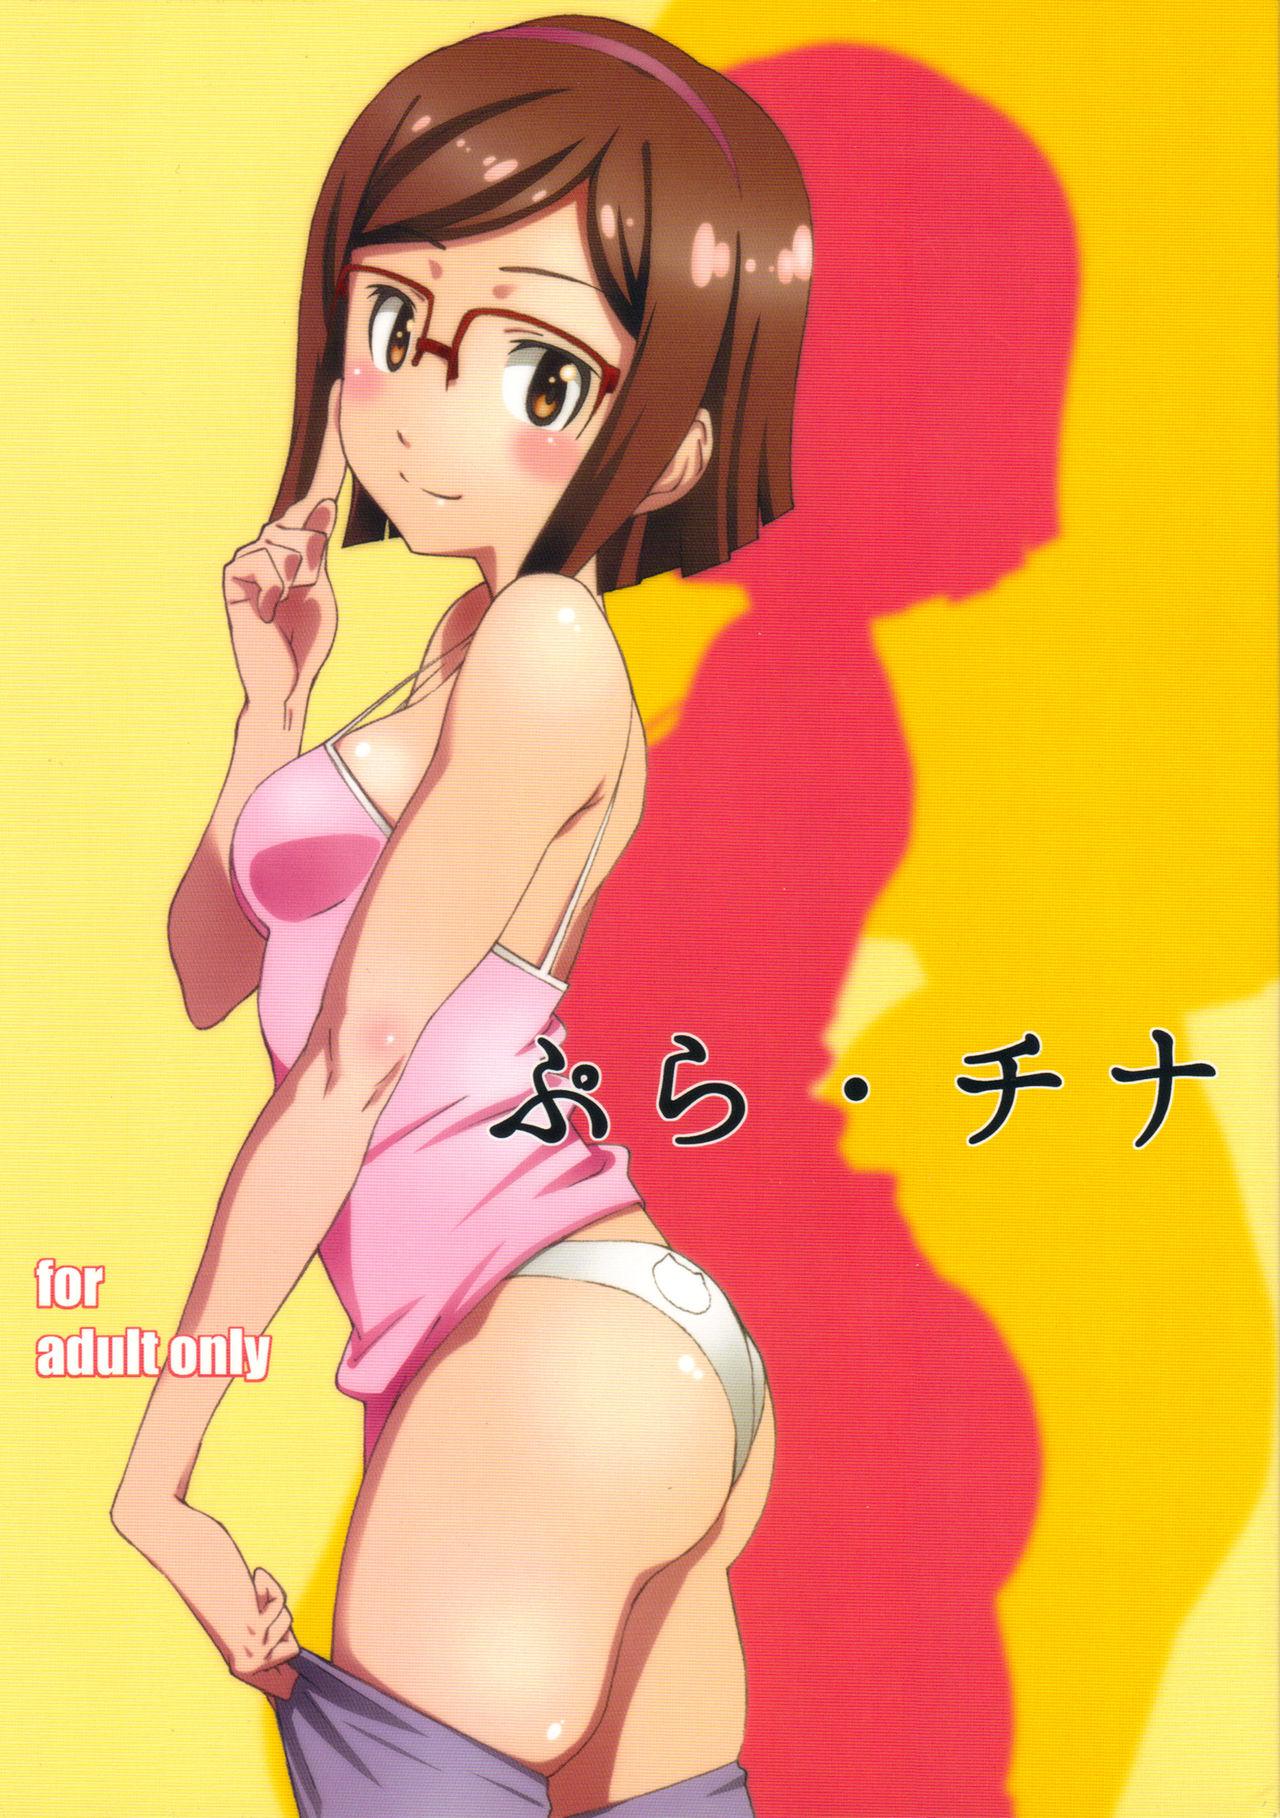 Oldvsyoung Pla-China - Gundam build fighters Caliente - Picture 1